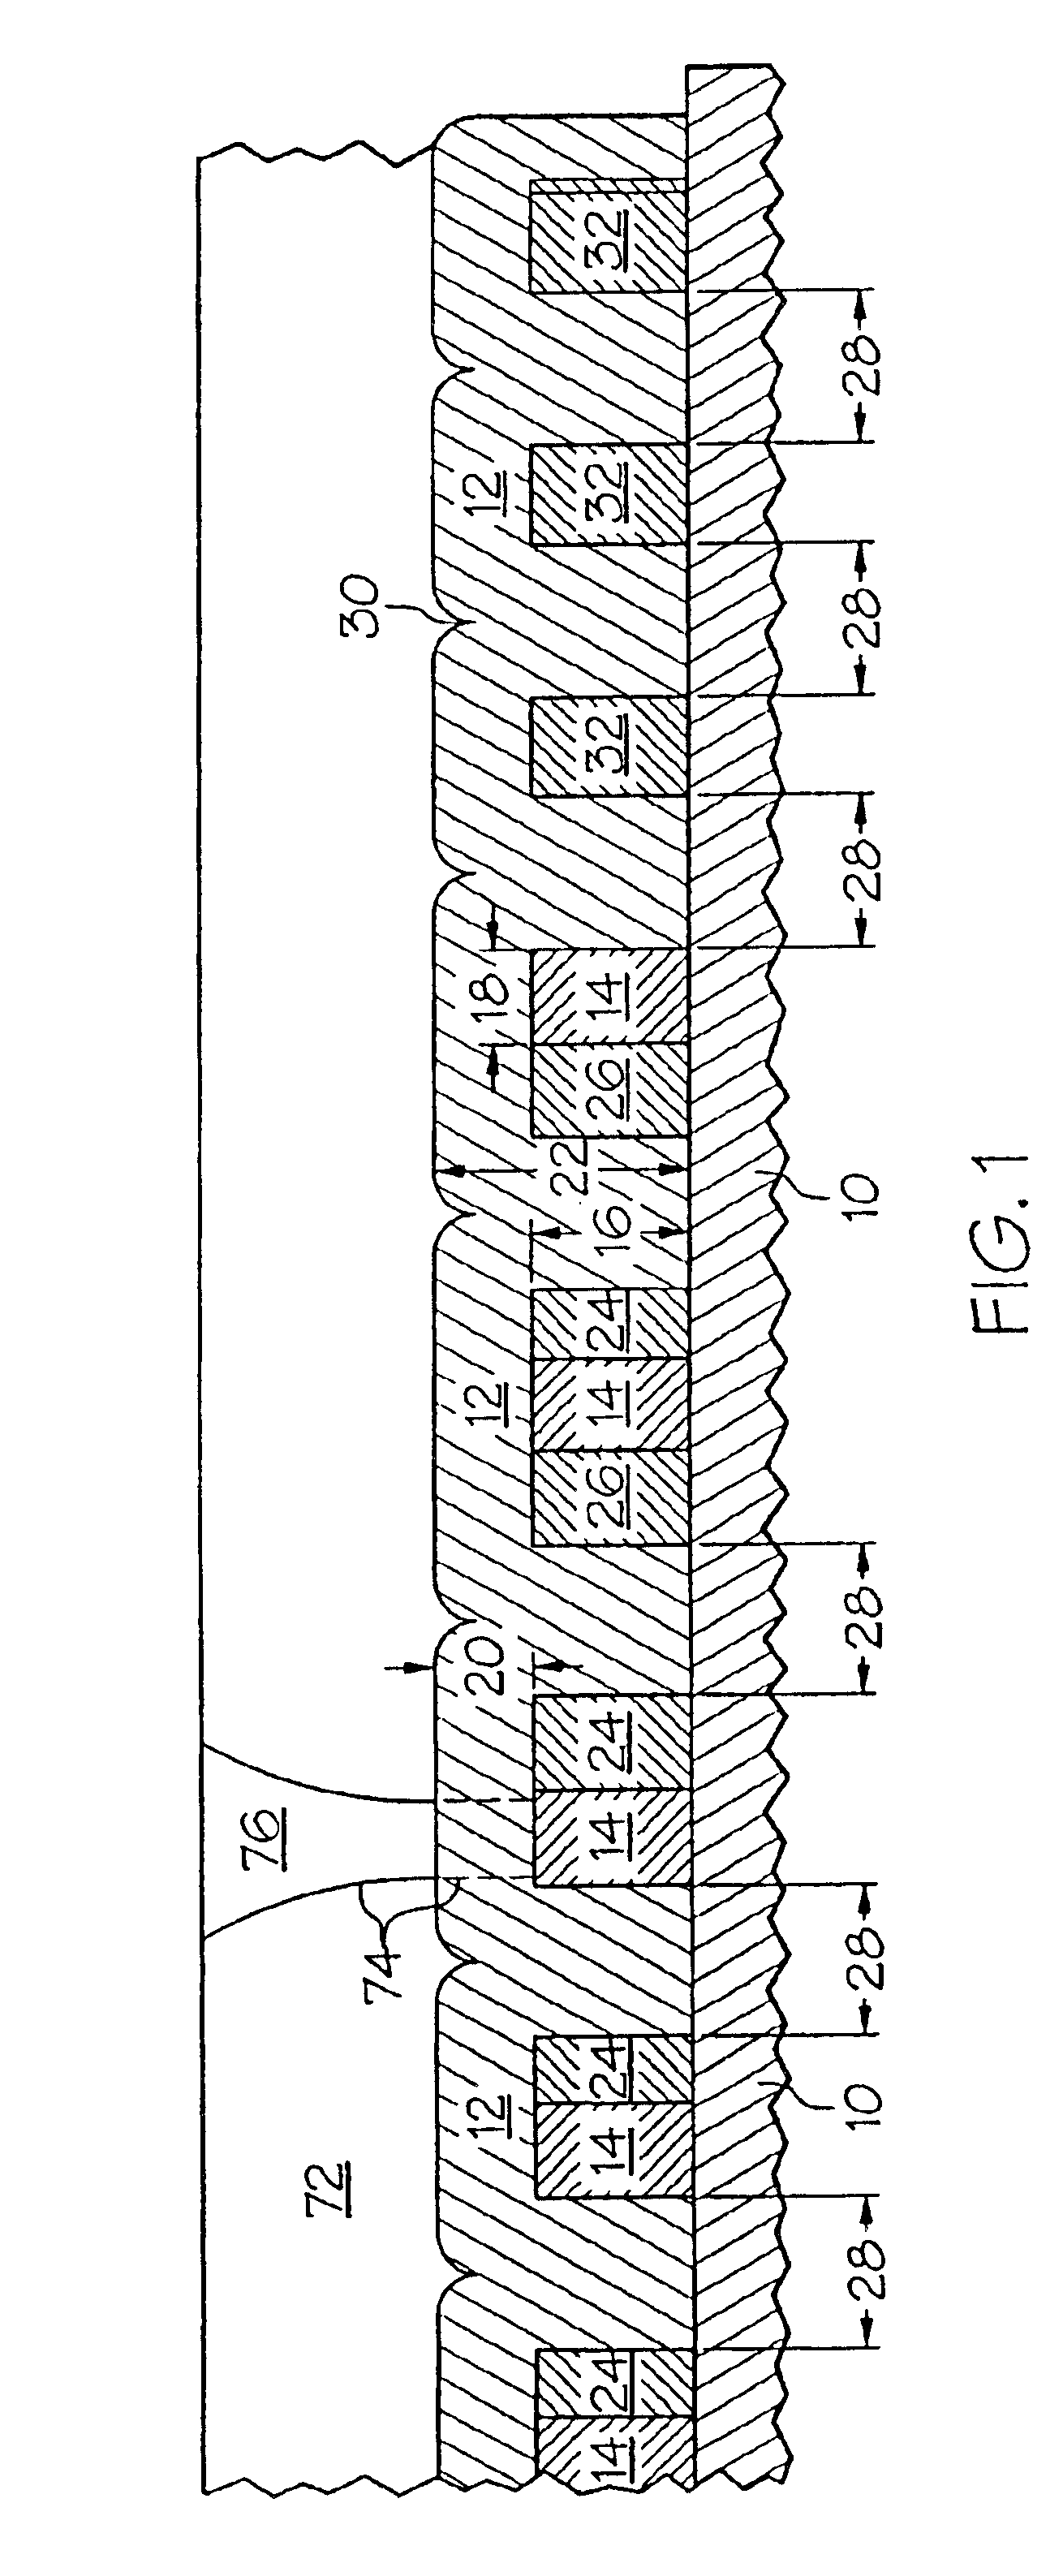 Metal line layout of an integrated circuit